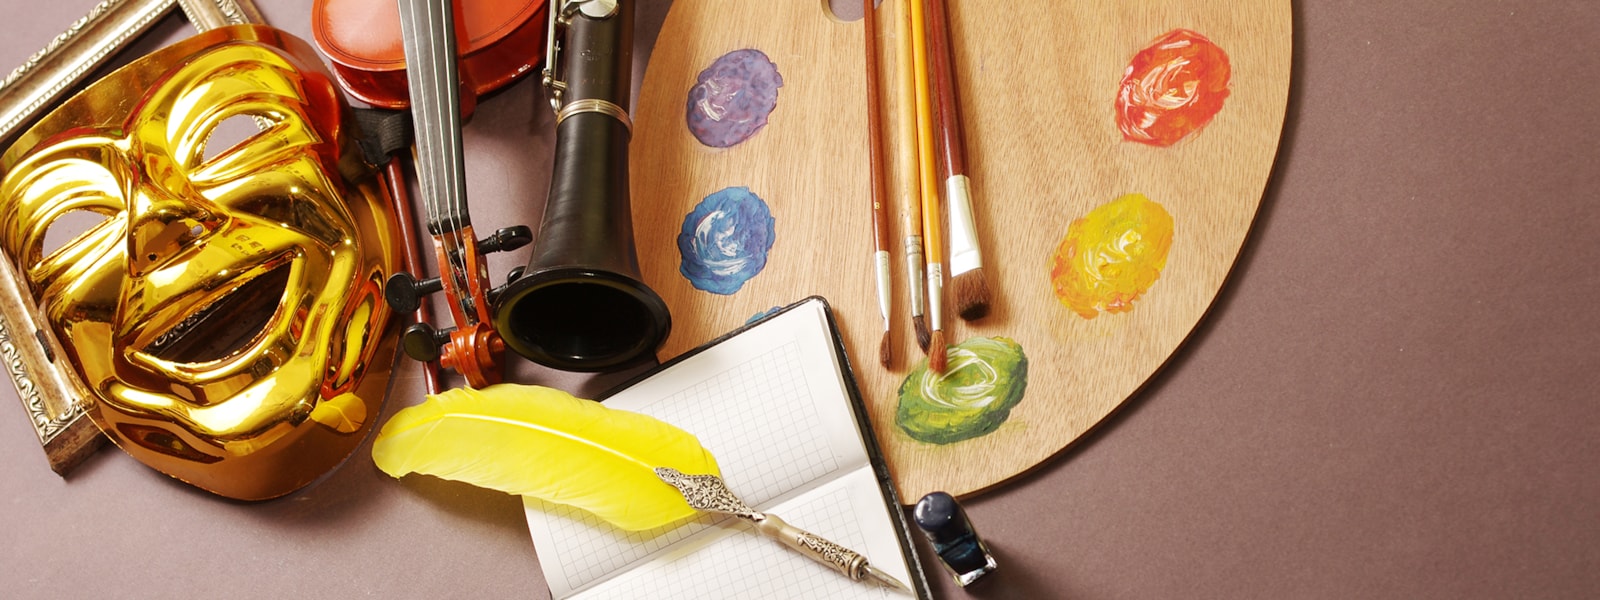 the arts symbols: drama mask, band instruments, writing journal and artist's palette